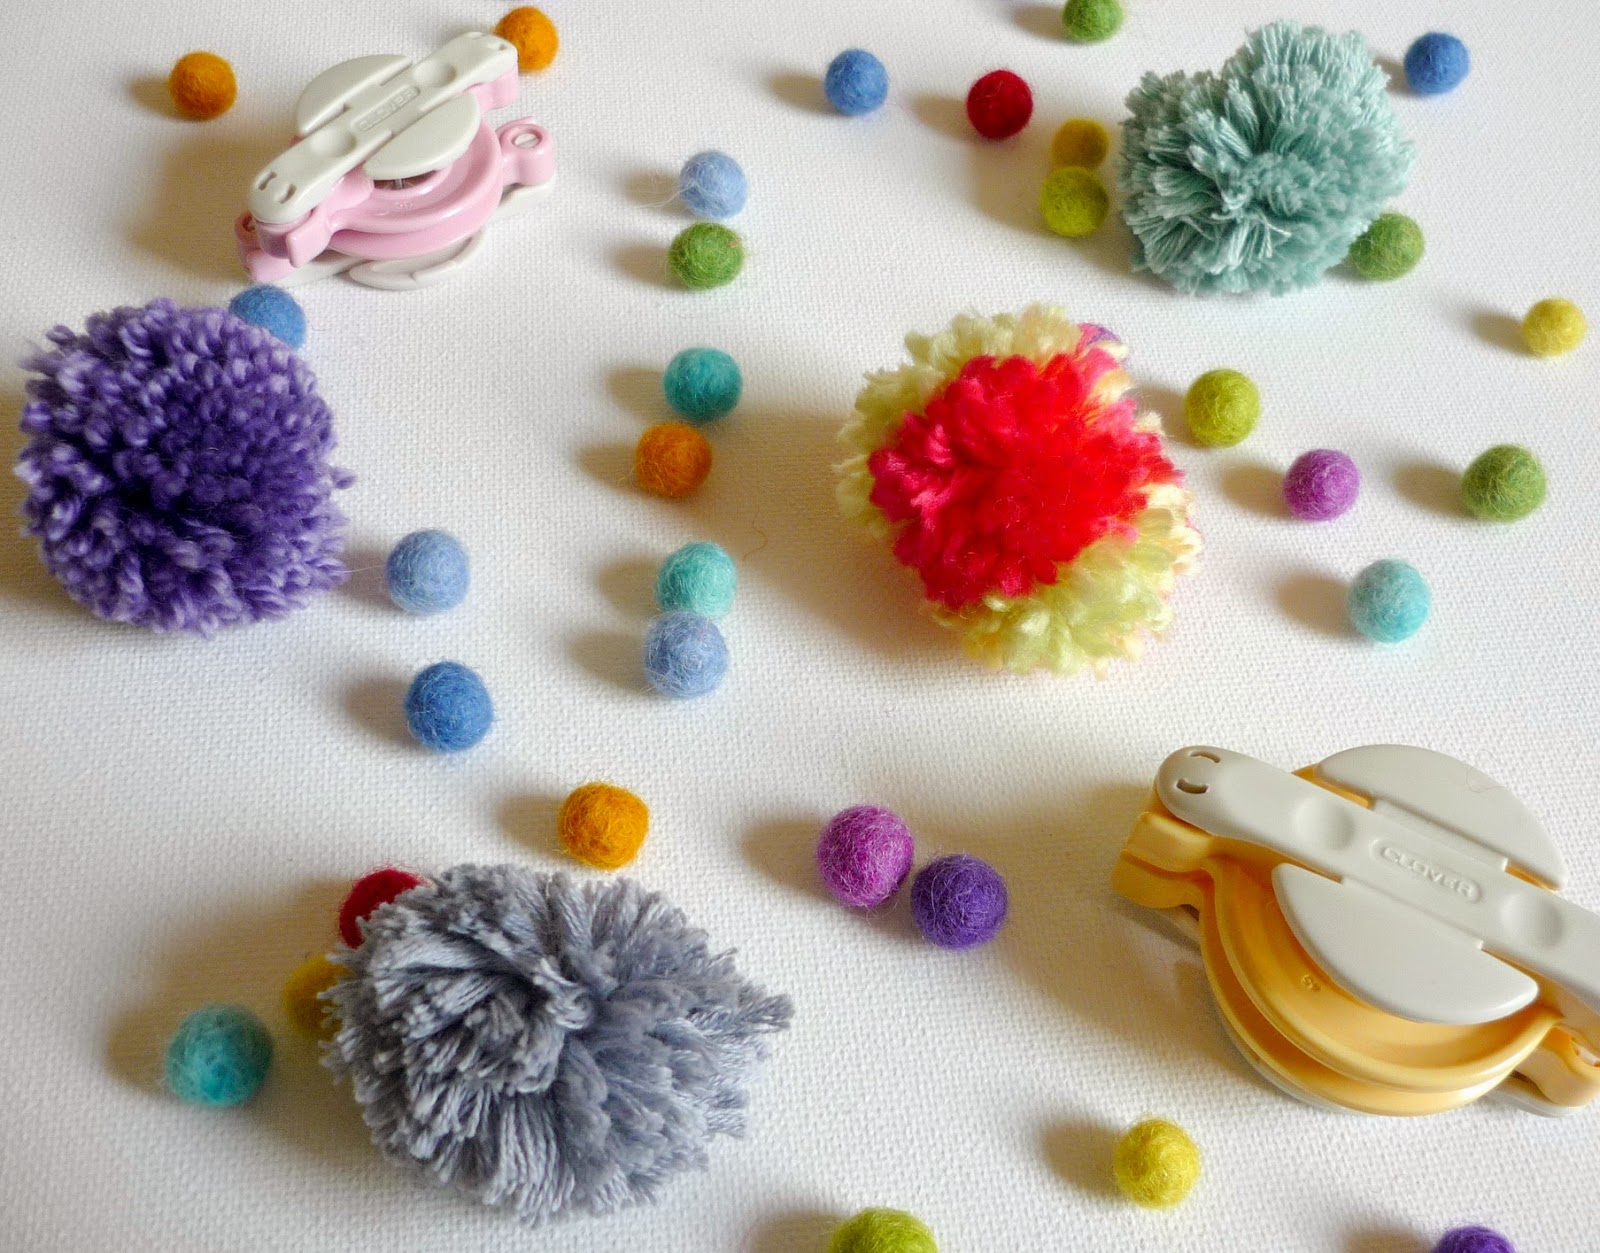 Abso-knitting-lutely!: How to Use a Clover Pompom Maker: Step-By